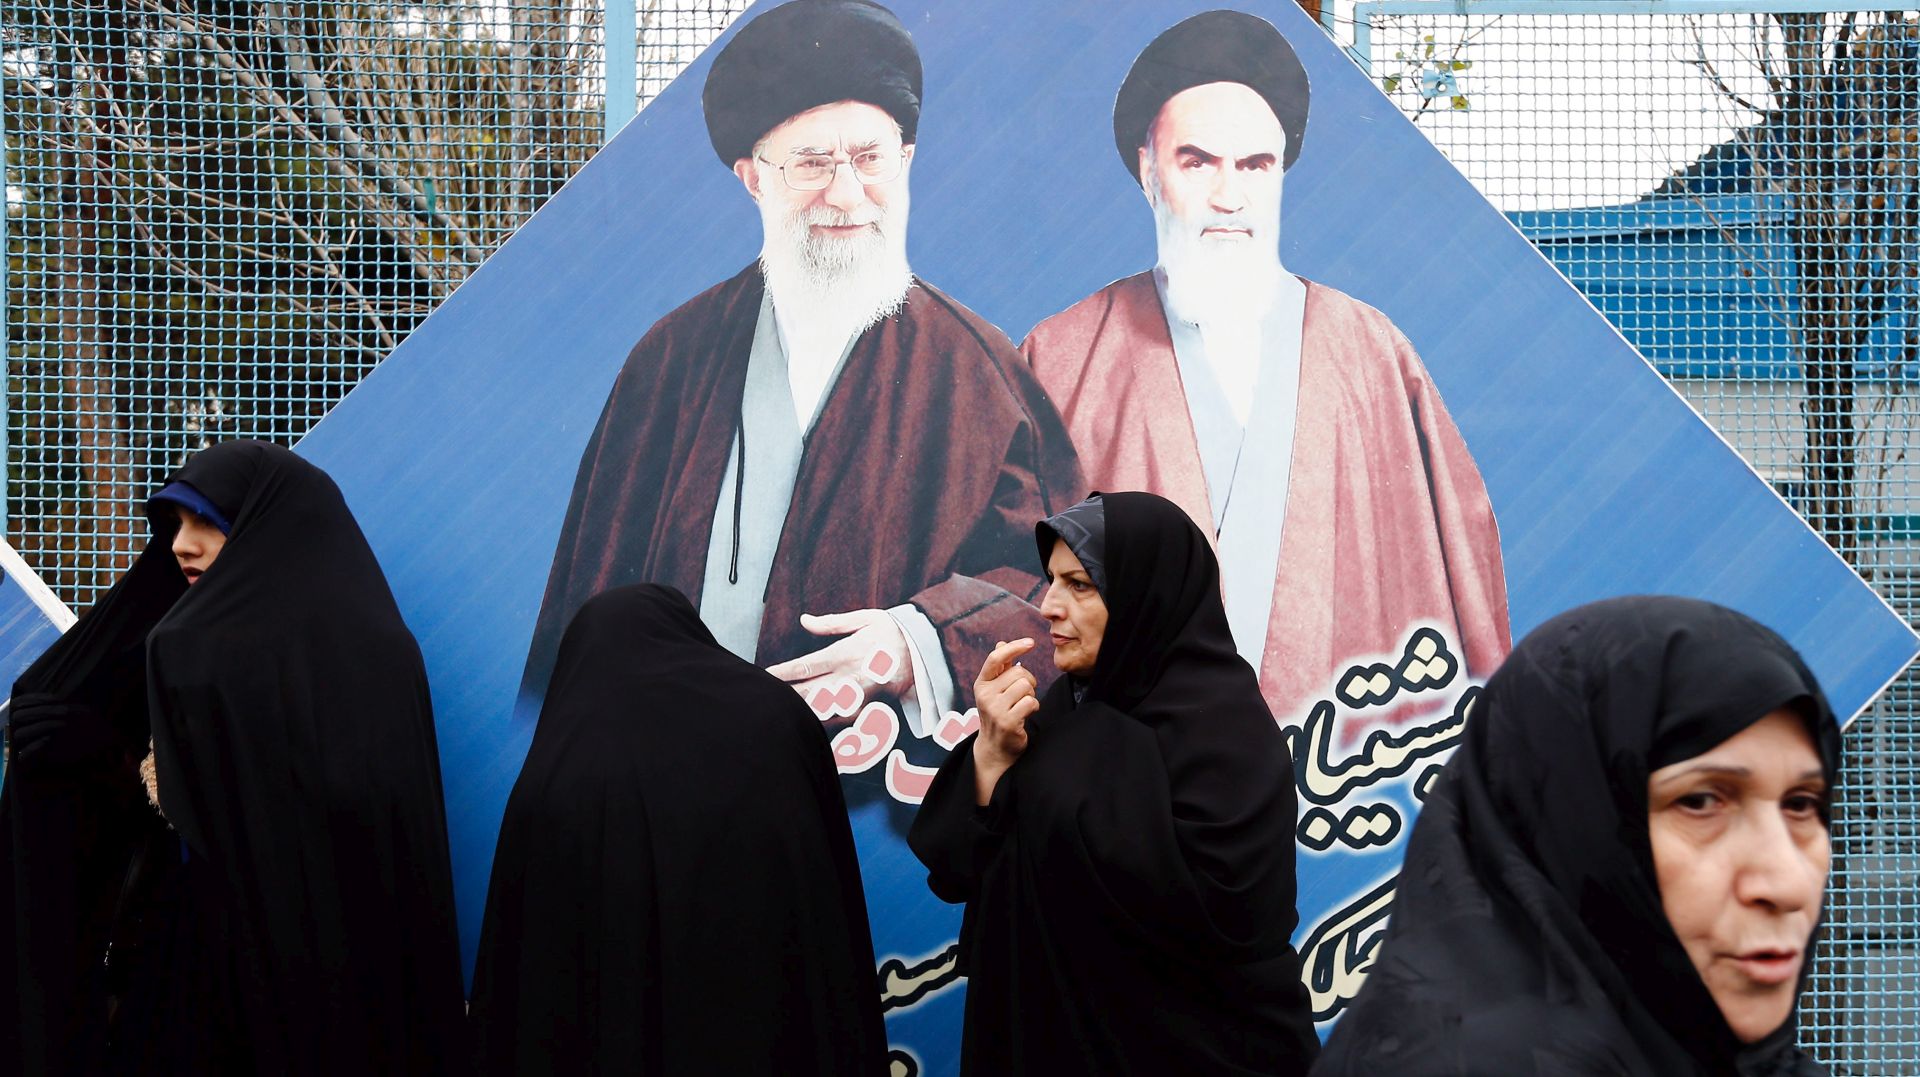 epa05092629 Iranian women stand in front of the huge pictures of Iranian late supreme leader Ayatollah Ruhollah Khomeini (Top-R) and Iranian supreme leader Ayatollah ali Khamenei (Top-L) during an anti-Saudi Arabia demonstration after weekly Friday Prayer ceremony in Tehran, Iran, 08 January 2016. Relations between Riyadh and Tehran were further soured this week when Iran condemned Saudi Arabia's execution of Shiite Sheikh Nimr al-Nimr, a fiery critic of the kingdom's Sunni authorities. The execution of al-Nimr on 02 January has led to protests by Shiite Muslims across the region.  EPA/ABEDIN TAHERKENAREH